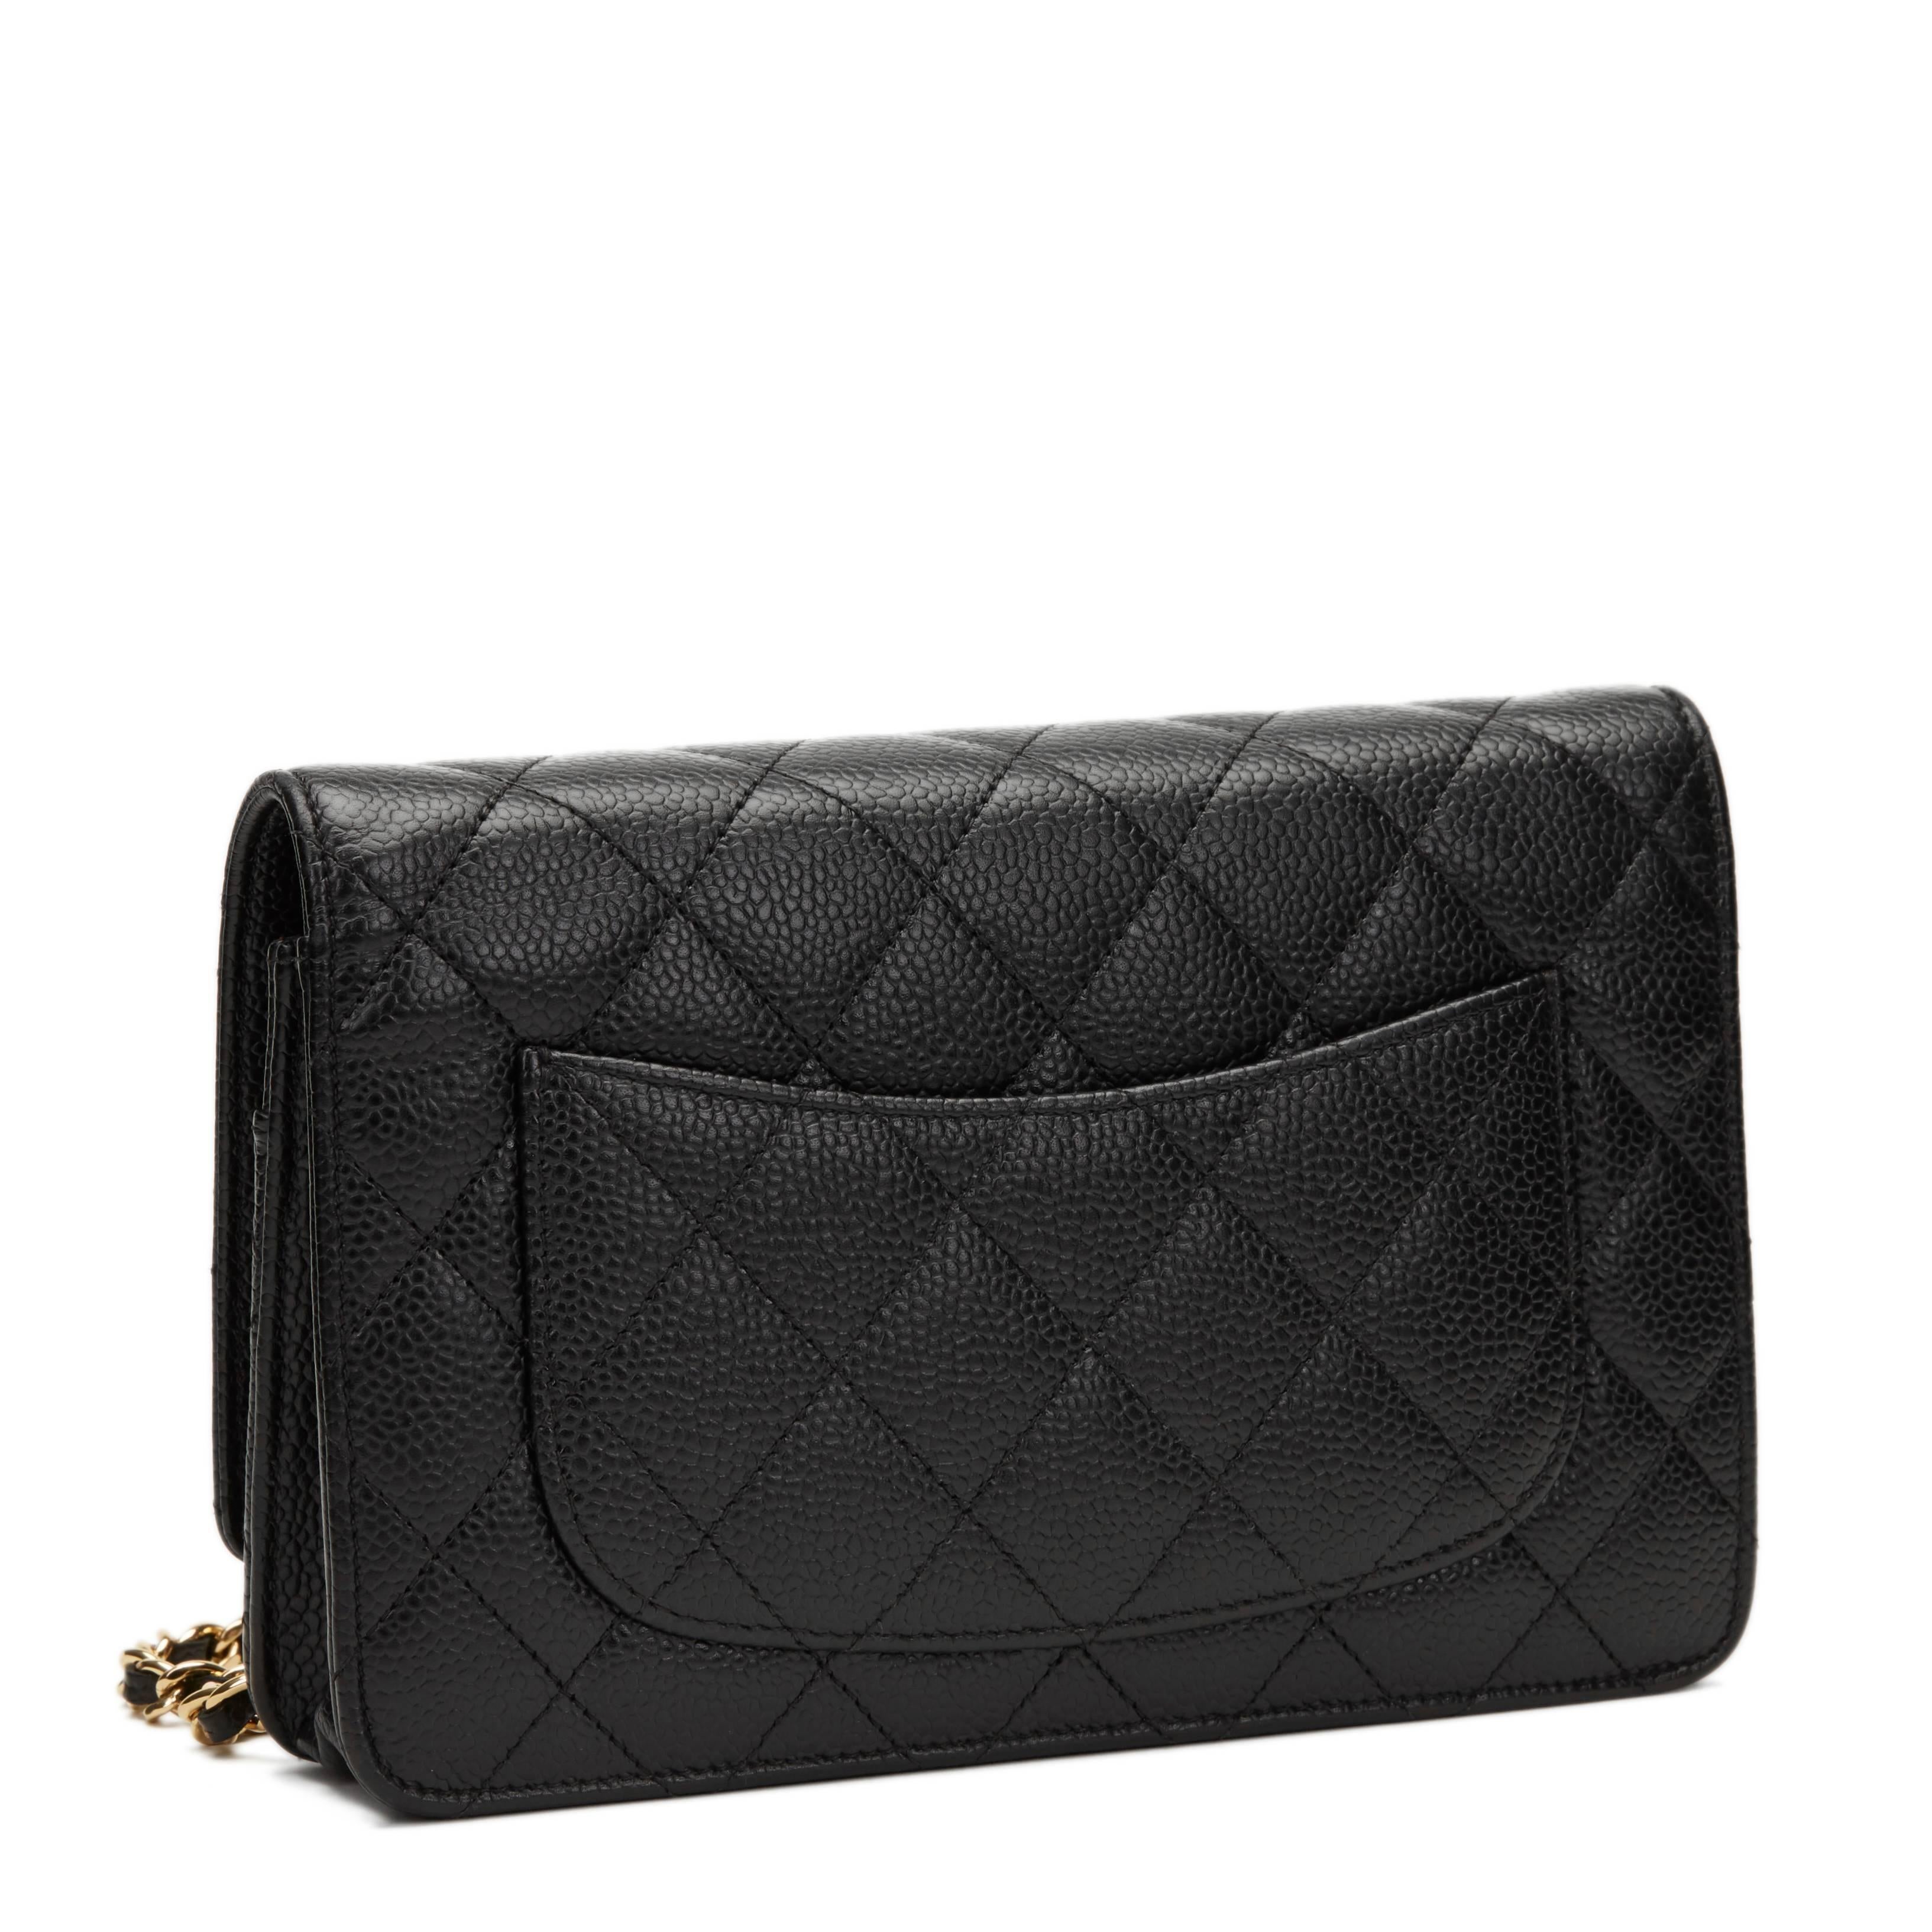 2013 Chanel Black Quilted Caviar Leather Wallet-on-Chain WOC 3